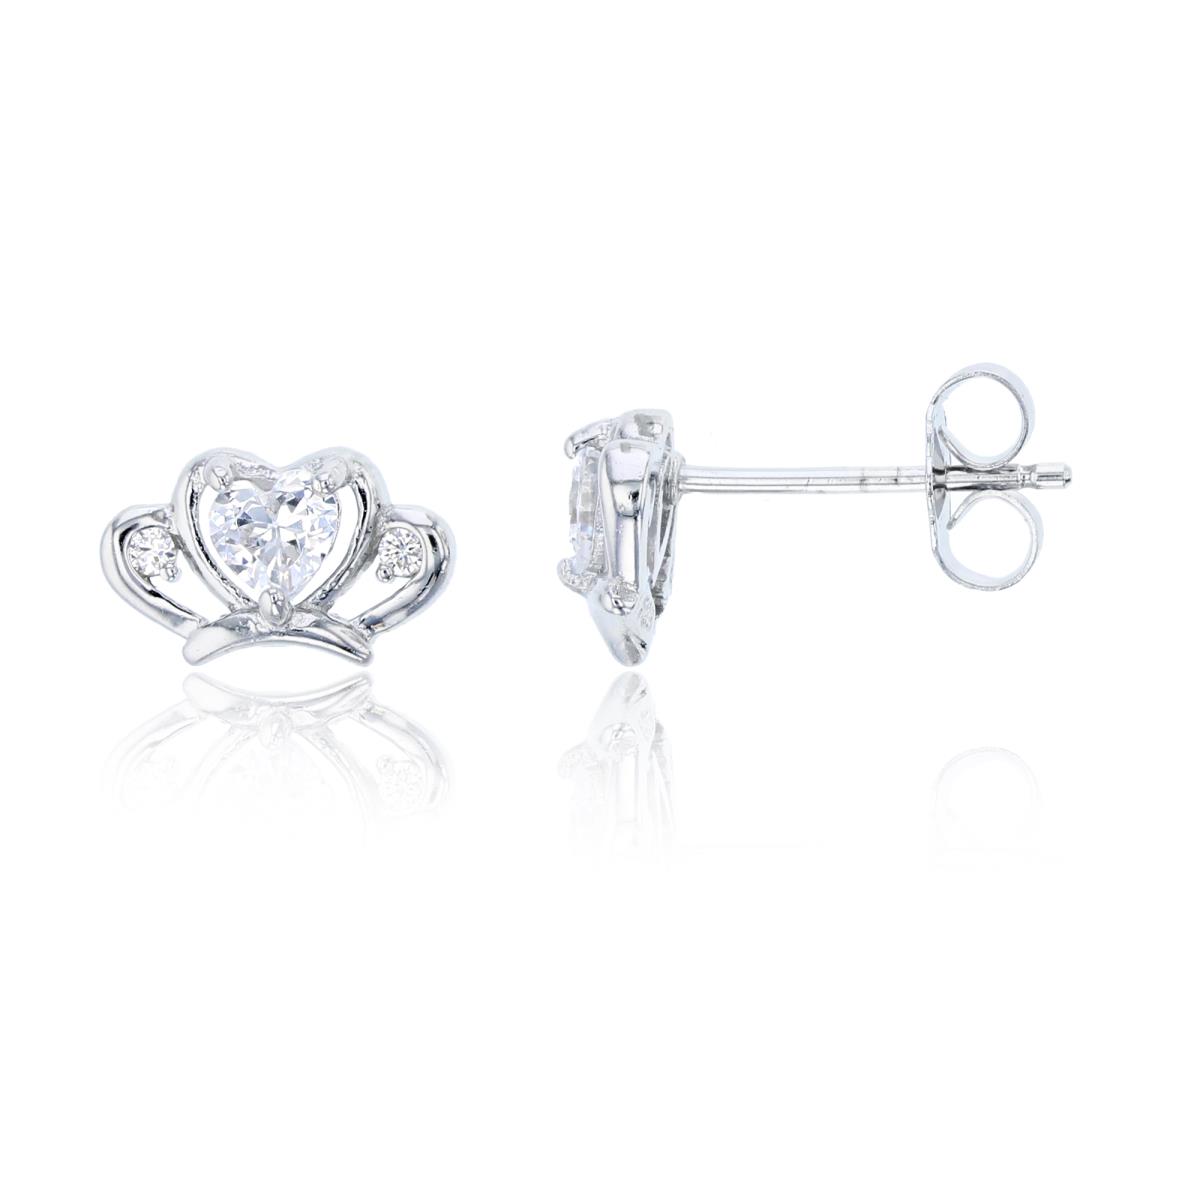 Sterling Silver 10.5x6.5mm Micropave Princess Crown Stud Earring